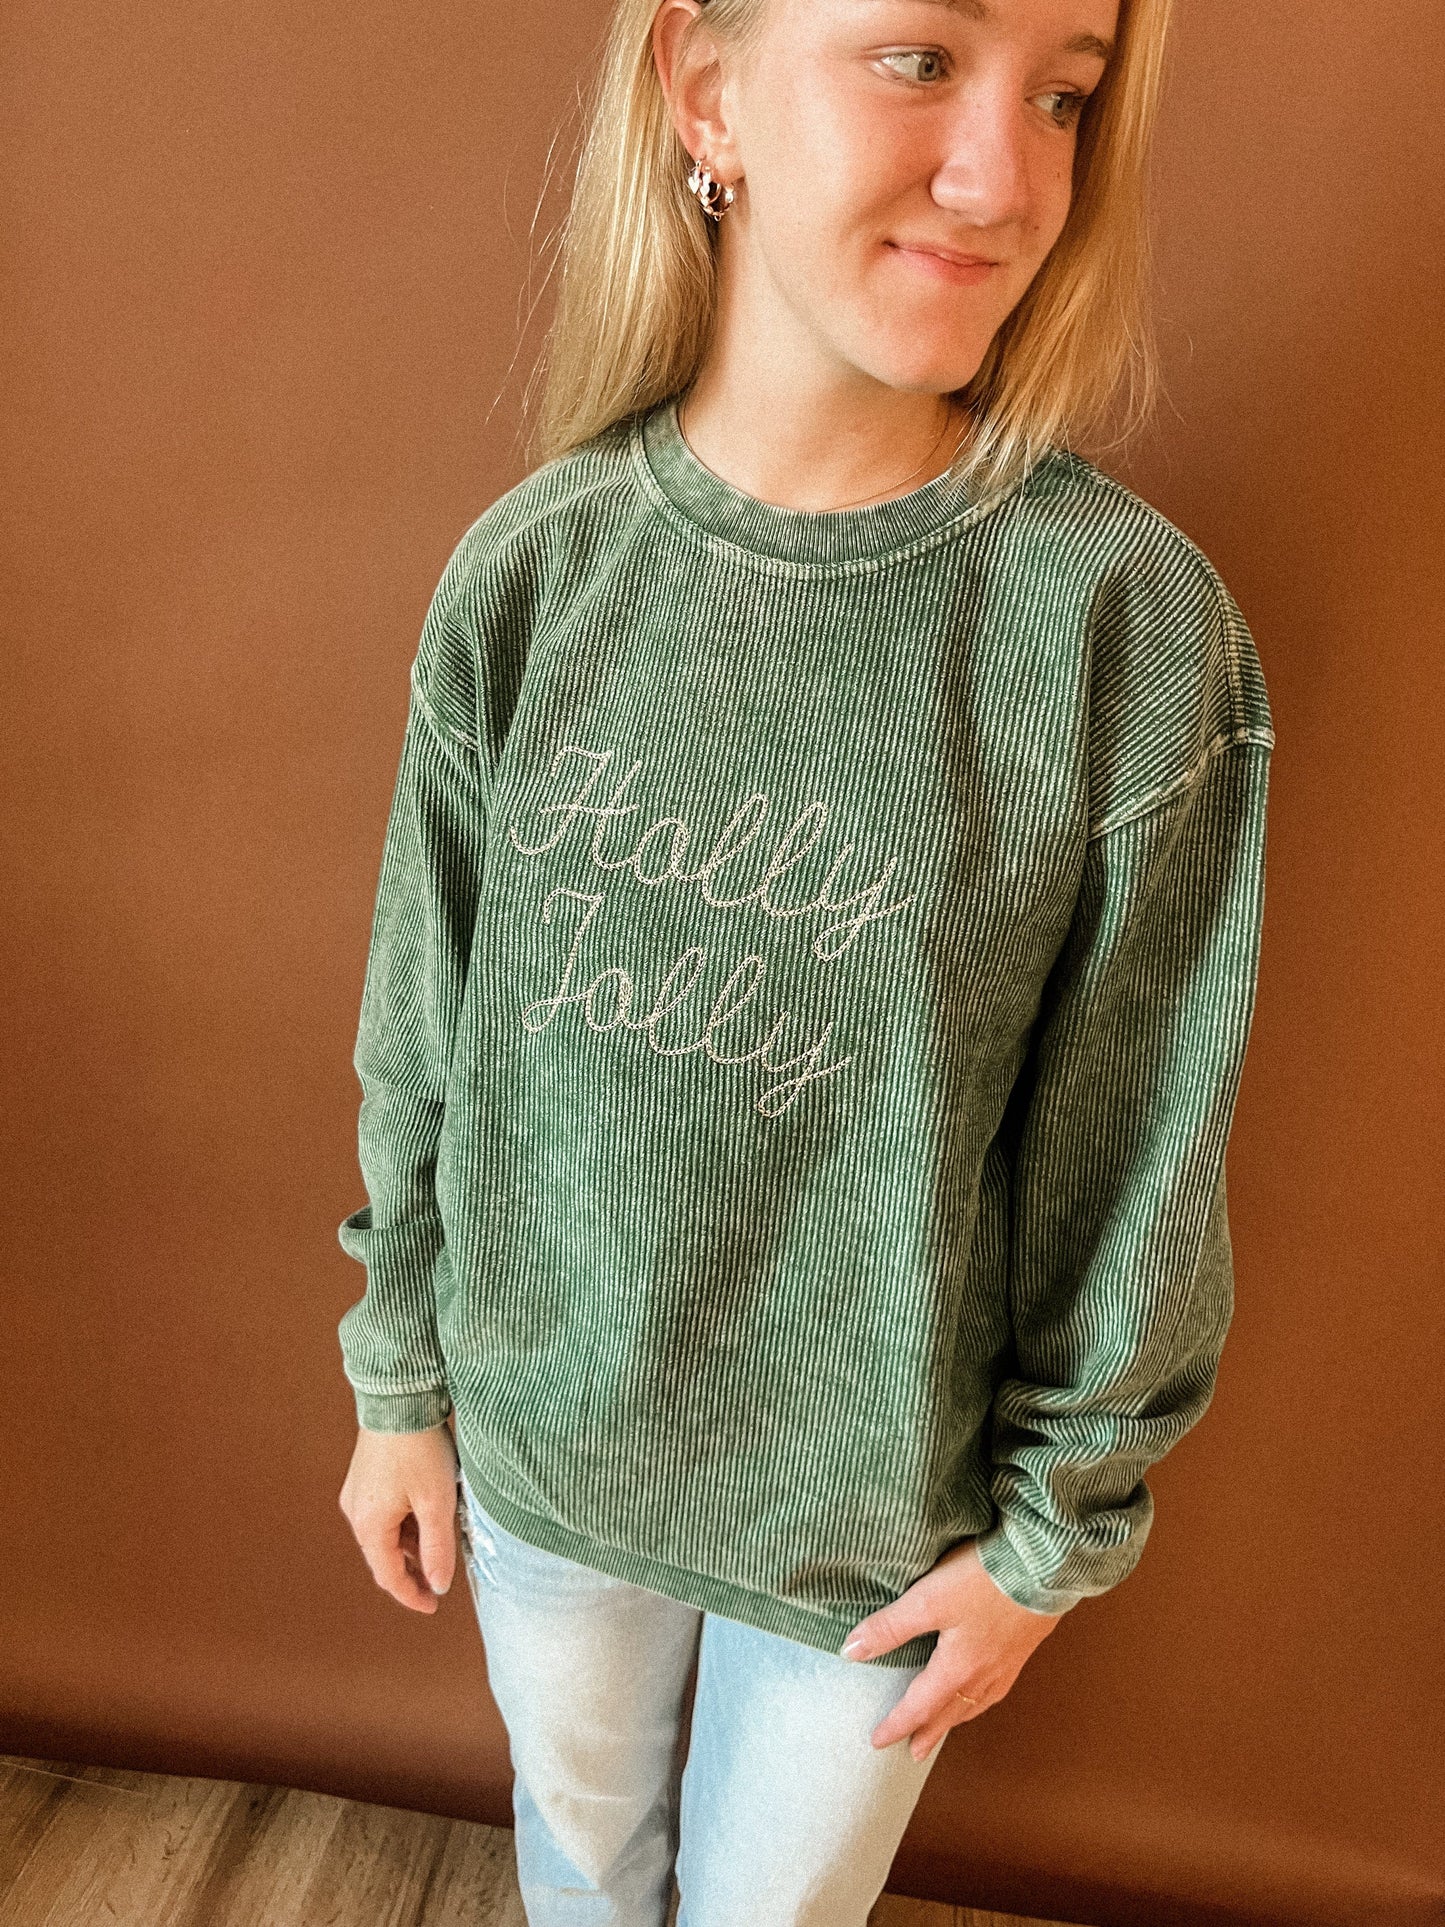 Embroidered Holly Jolly Corded Sweatshirt